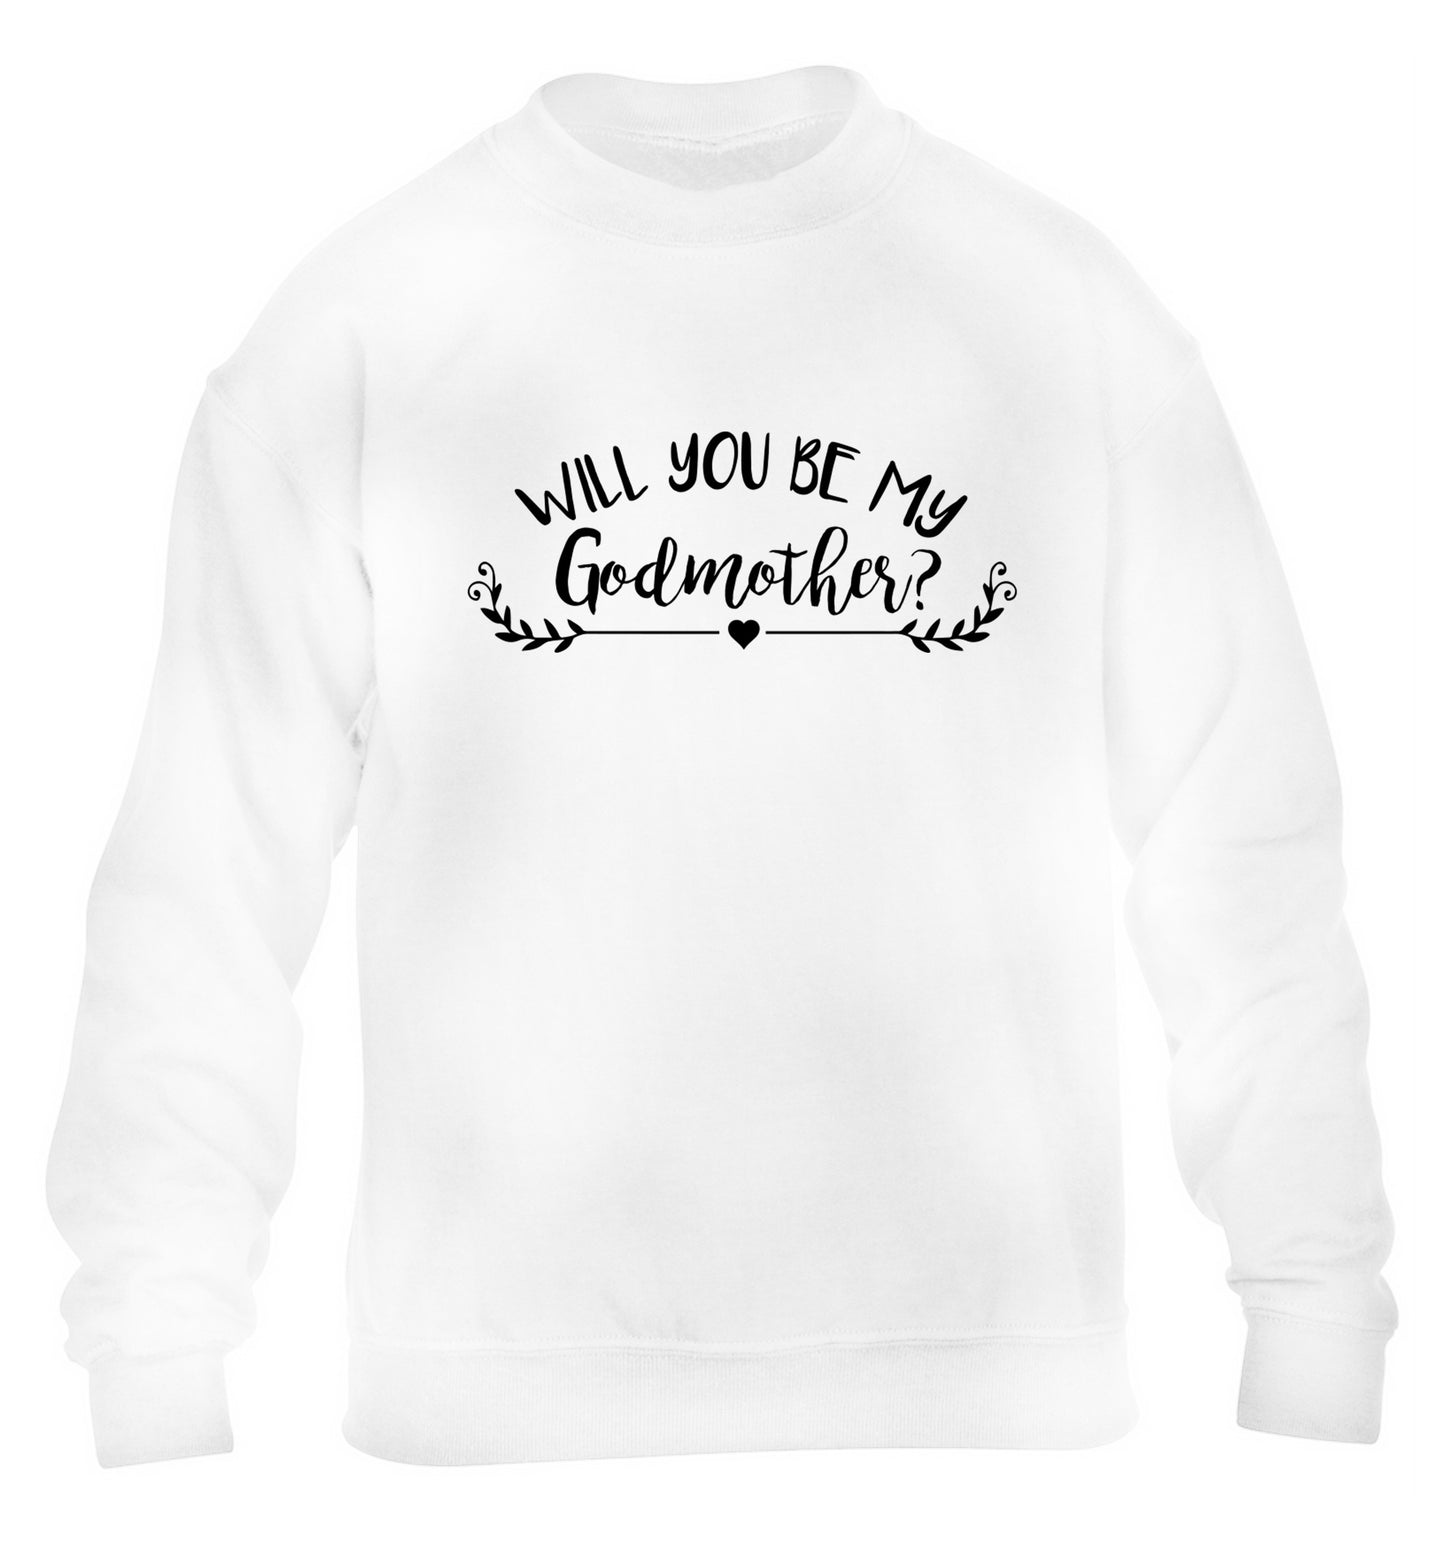 Will you be my godmother? children's white sweater 12-14 Years